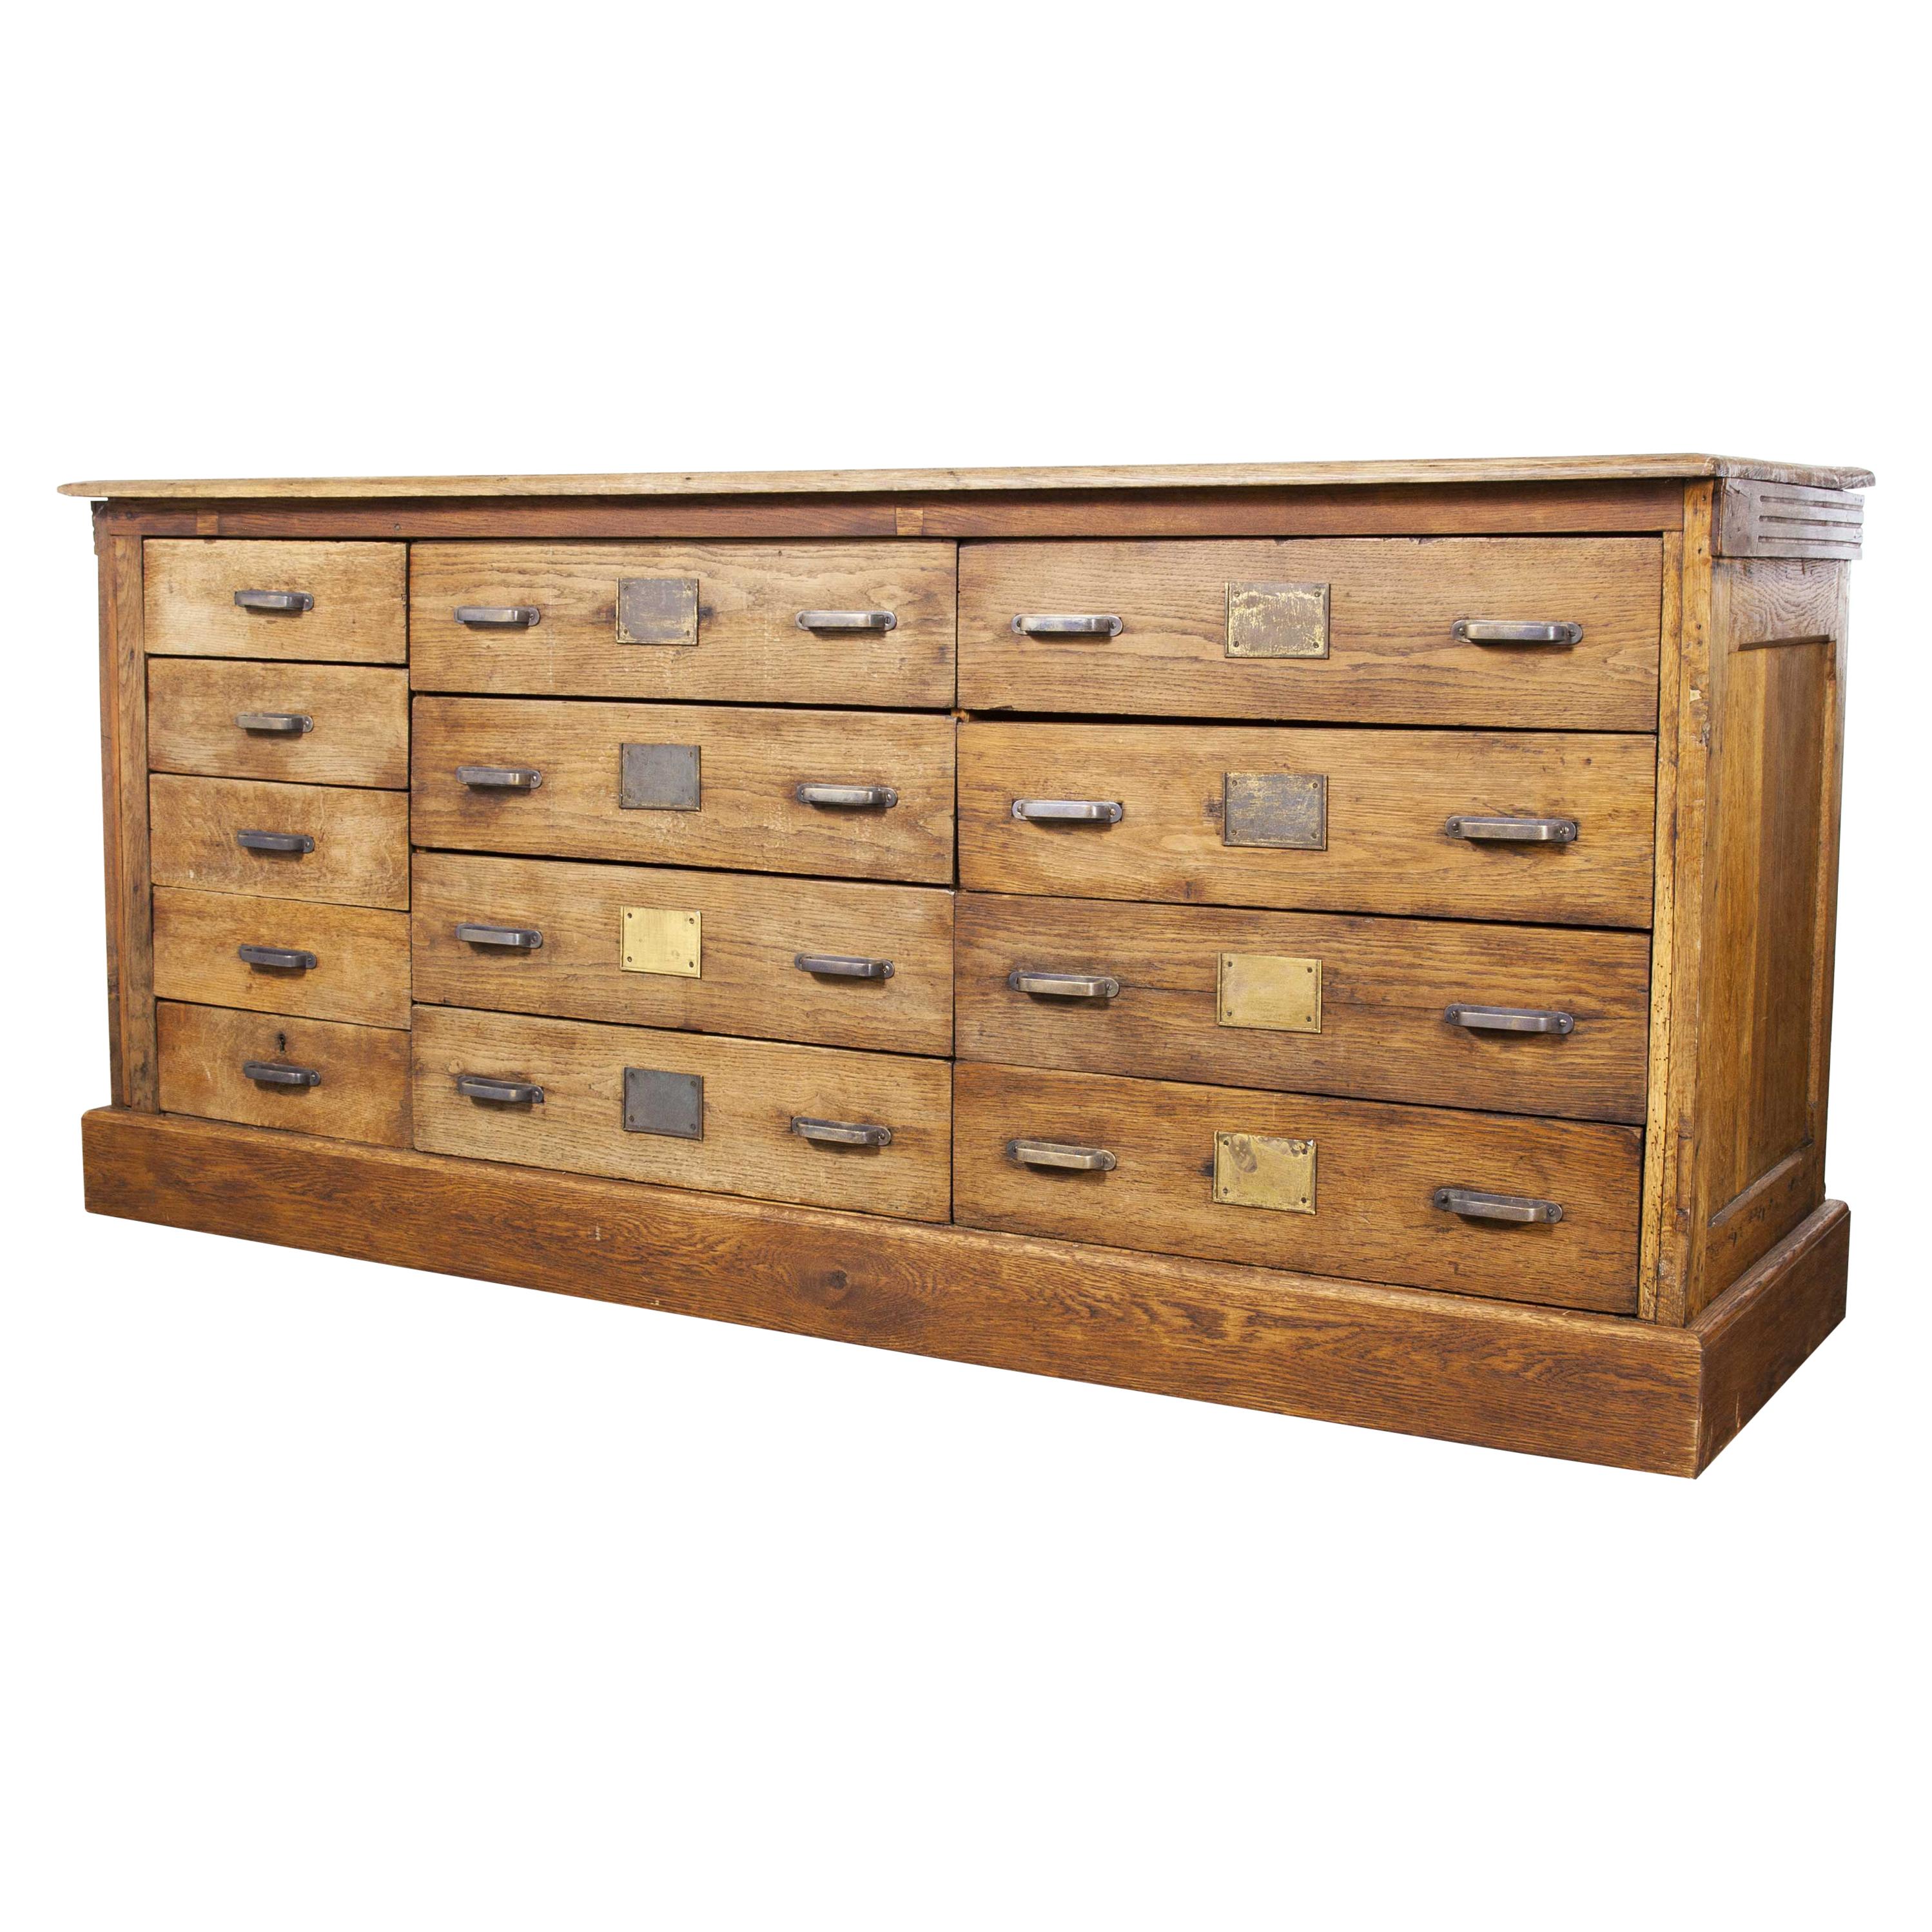 1910 French Large Bank of Solid Oak Collectors Drawers, Chest of Drawers